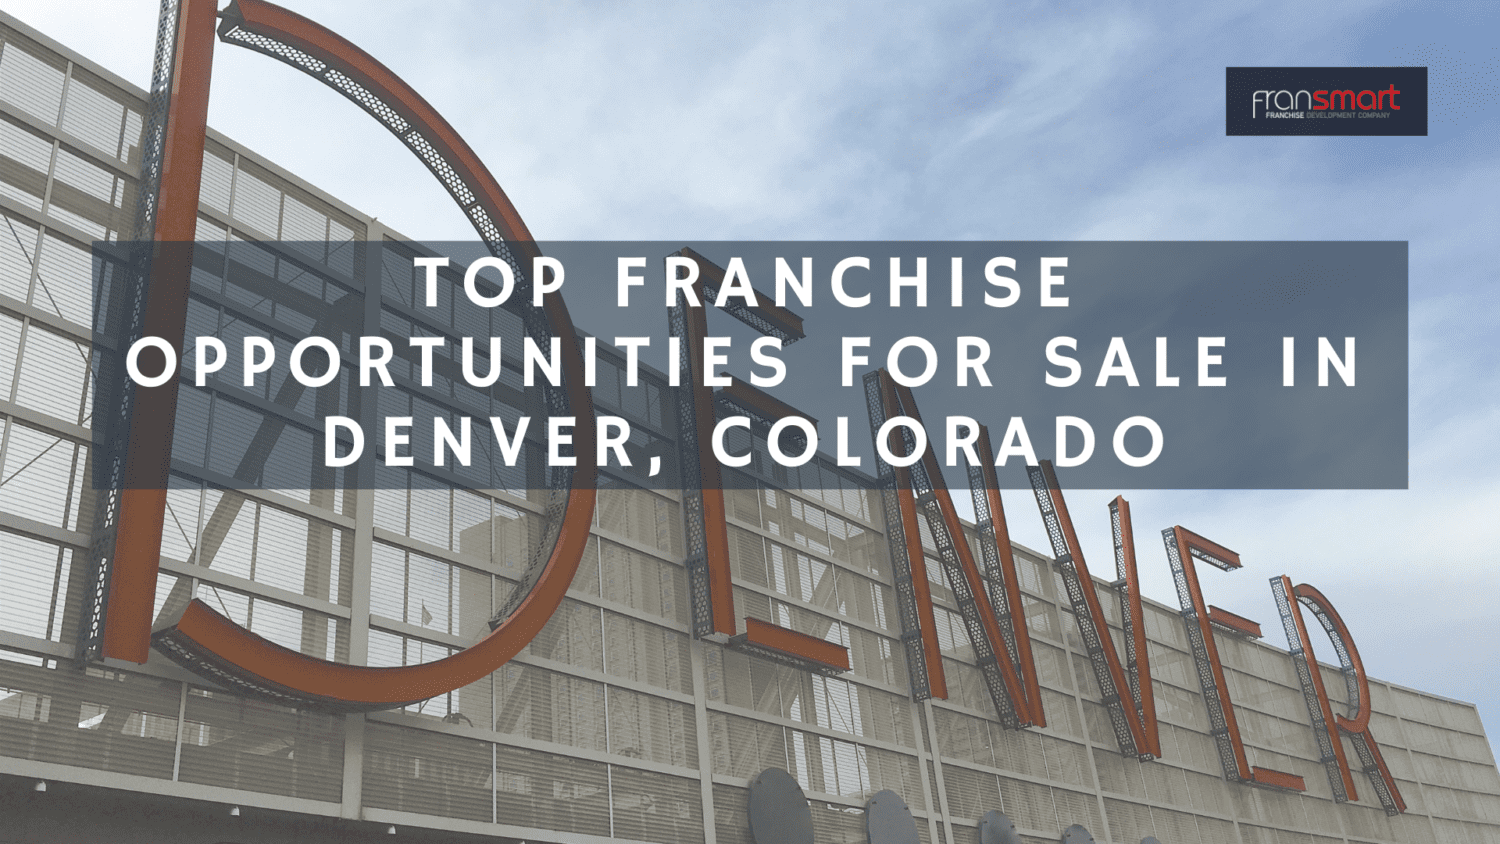 Top 5 Franchise Opportunities for Sale in Denver, Colorado